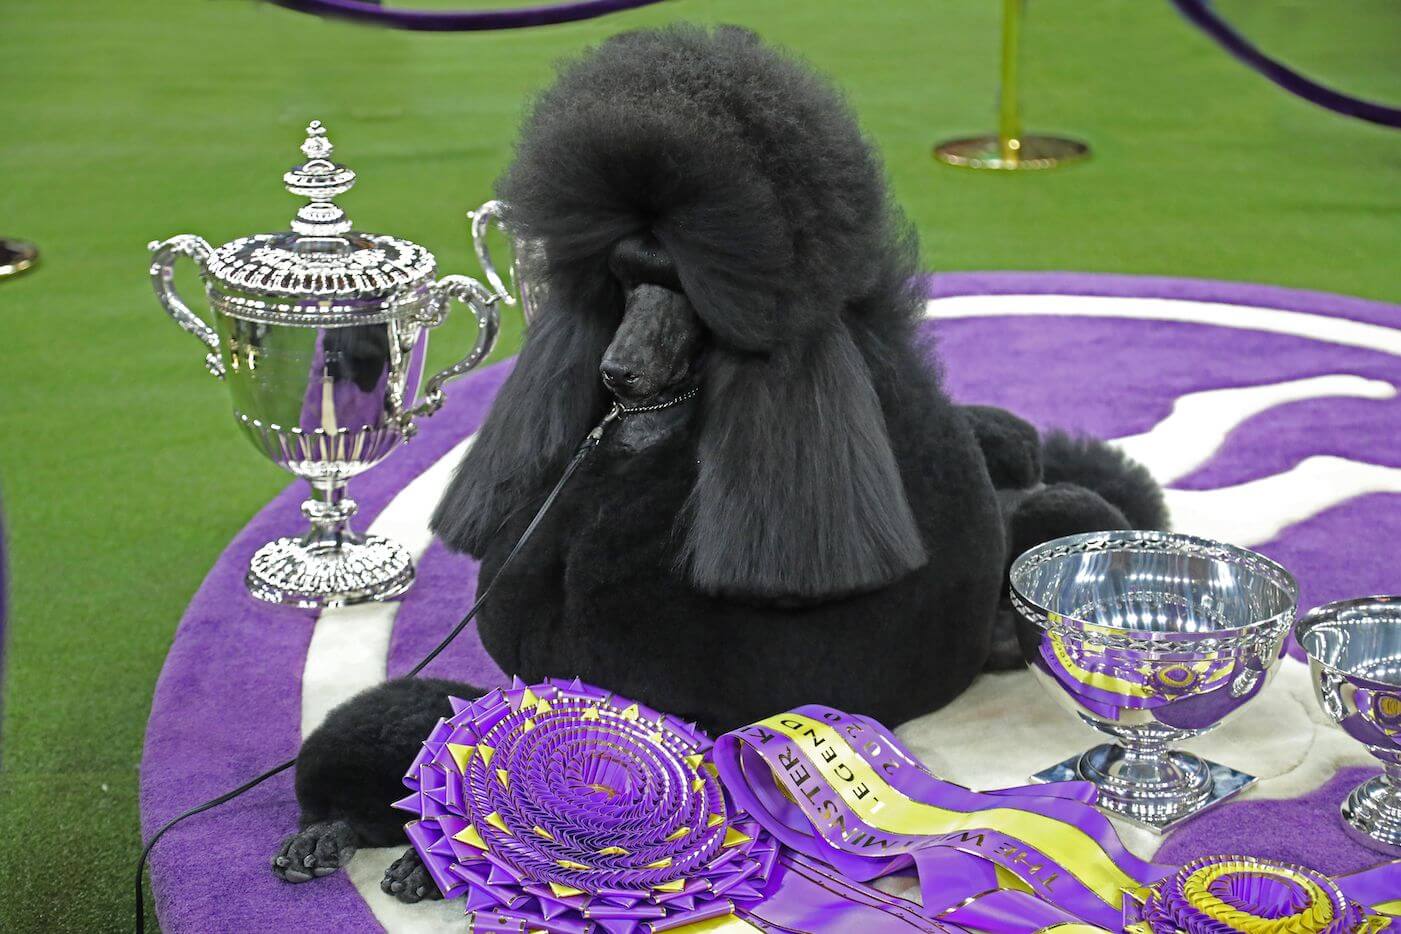 When did the first Standard Poodle win Westminster Best in Show